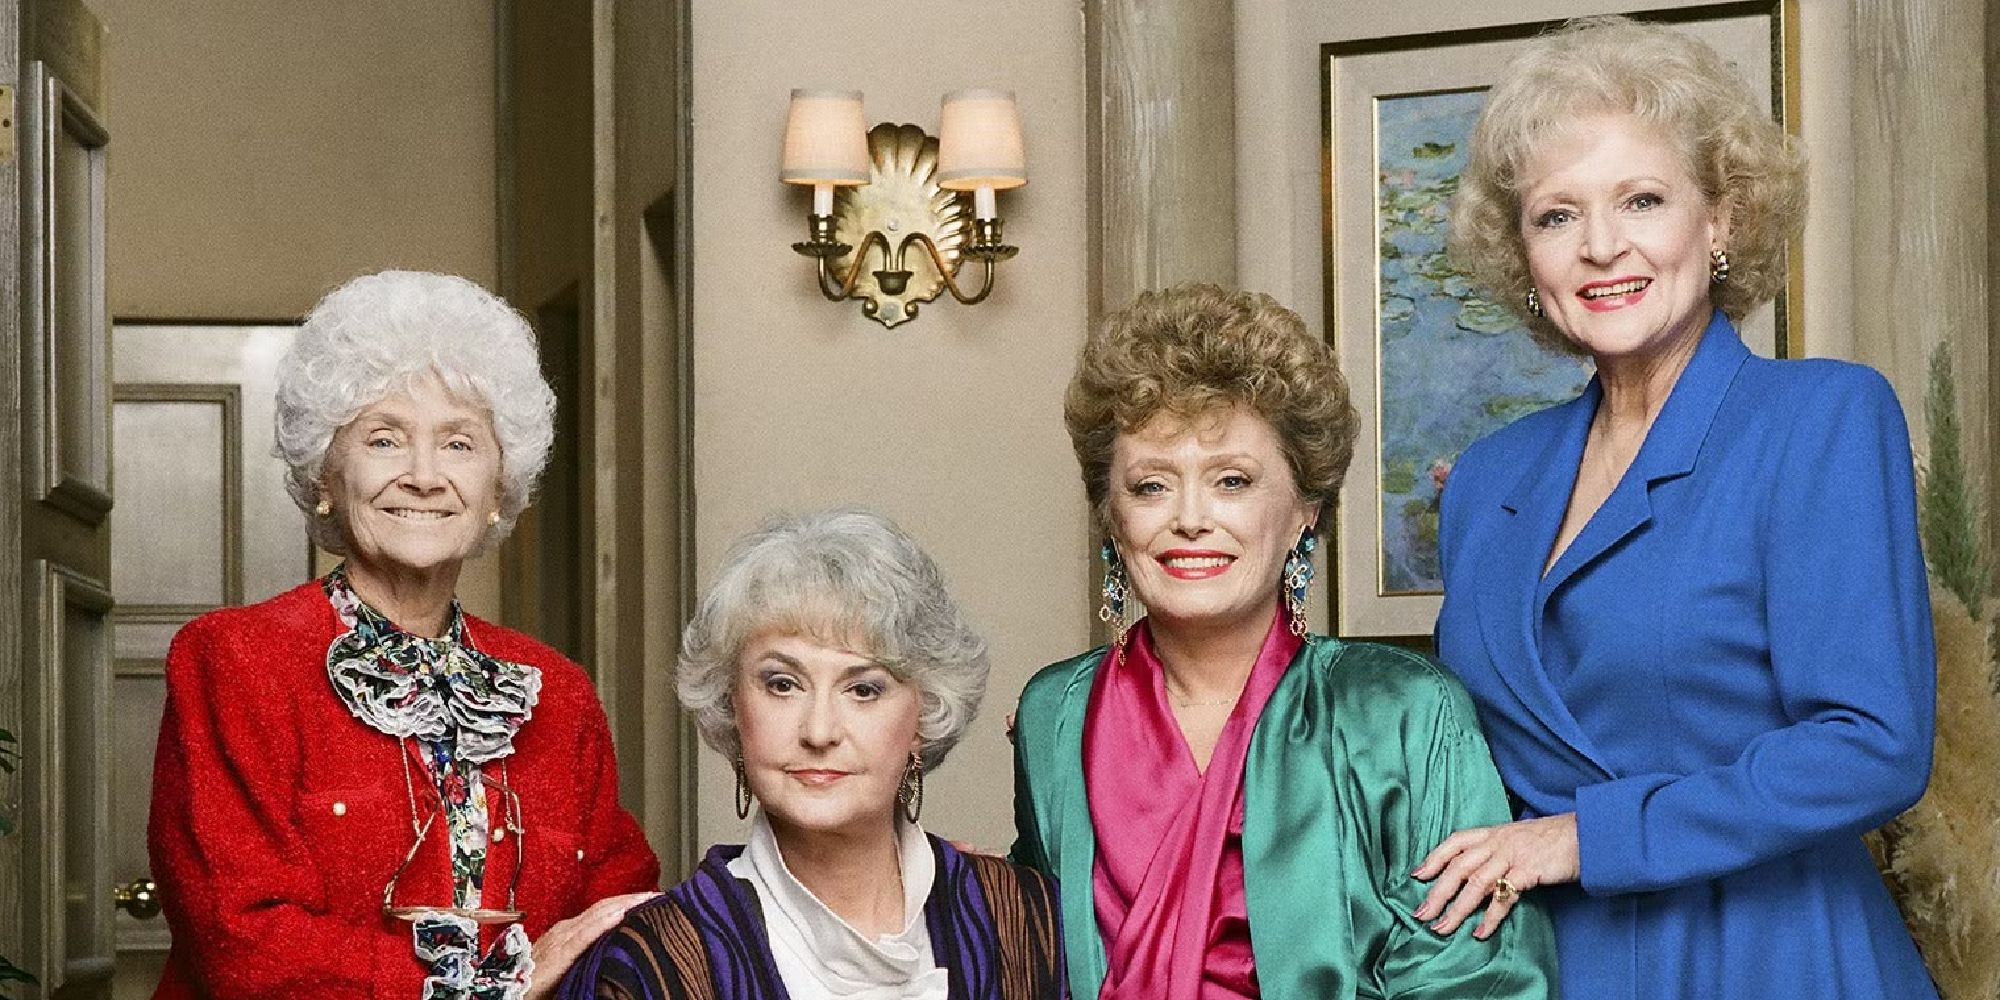 Bea Arthur, Betty White, Rue McClanahan, and Estelle Getty in The Golden Girls